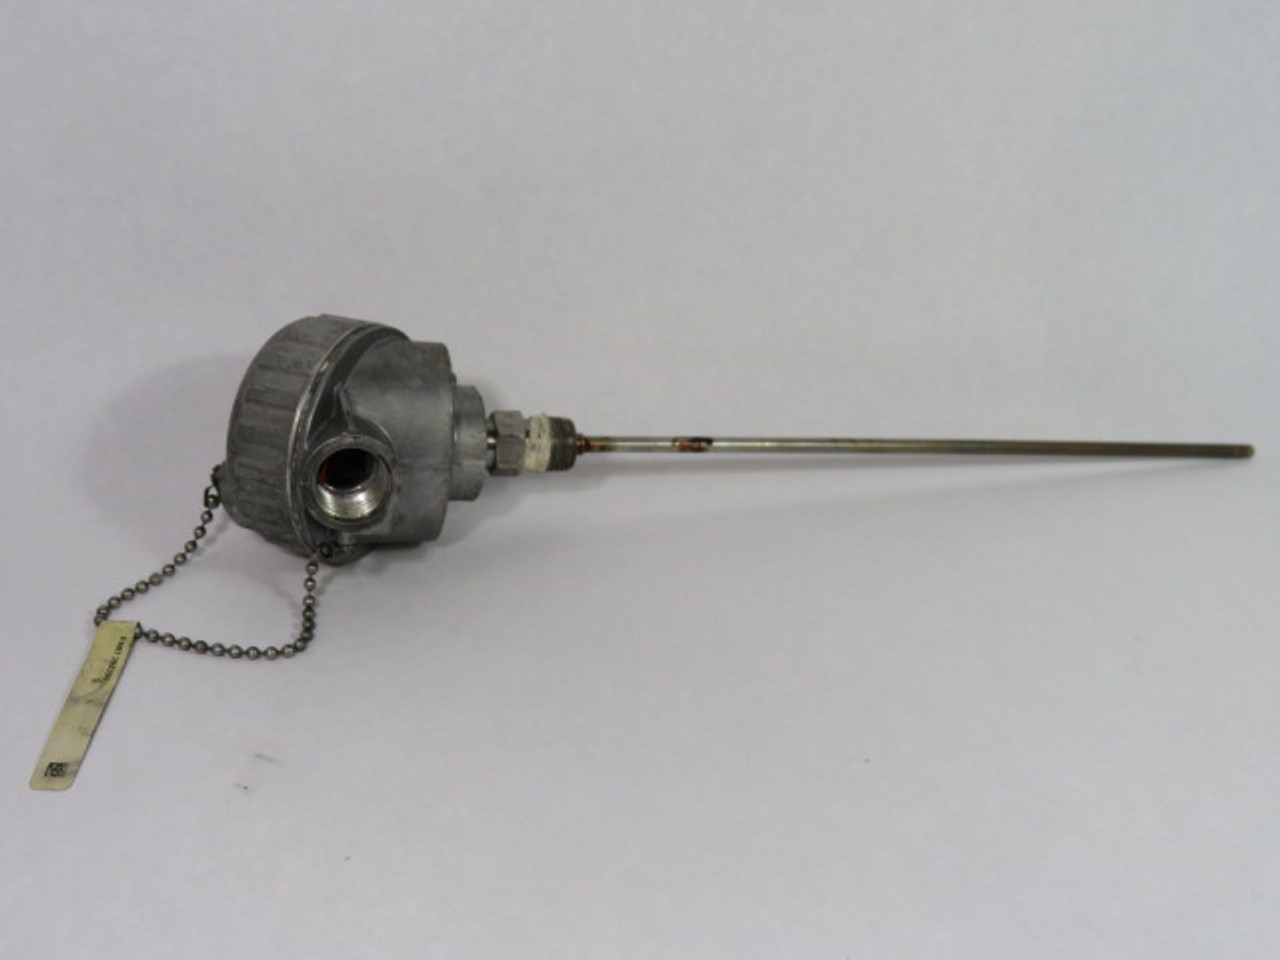 Megtec Systems WI54115 Temperature Probe USED